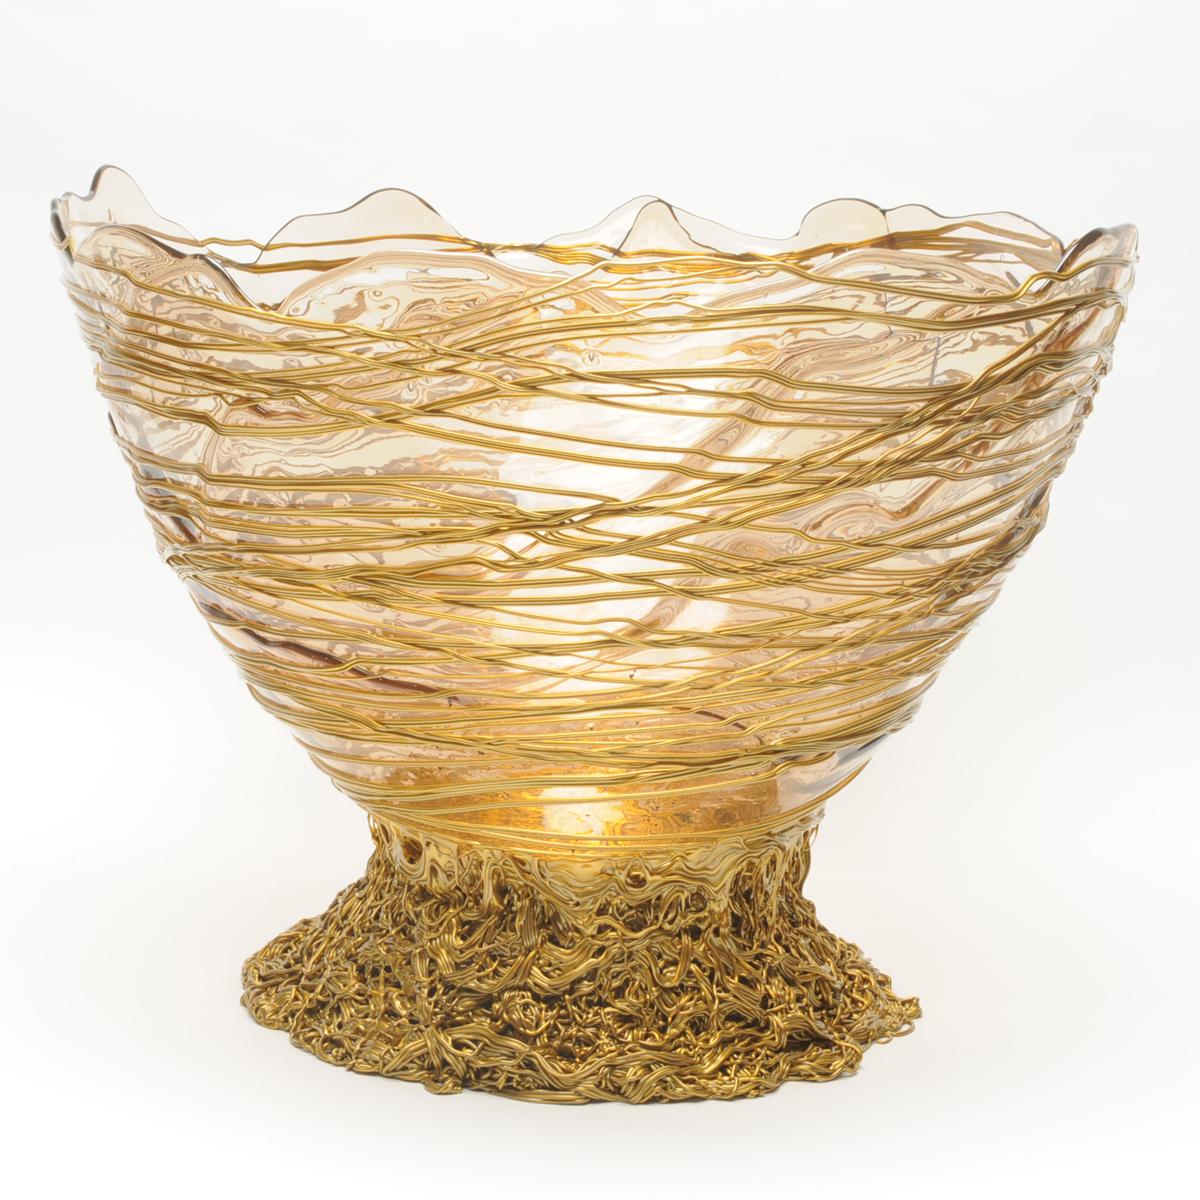 Ogiva basket - clear, gold

Basket in soft resin designed by Gaetano Pesce in 1995 for Fish Design collection.

Additional Information:
Material: Soft resin
Colours: Clear, gold
Dimensions: c.a ø 50cm x H 35cm 
Available in other size